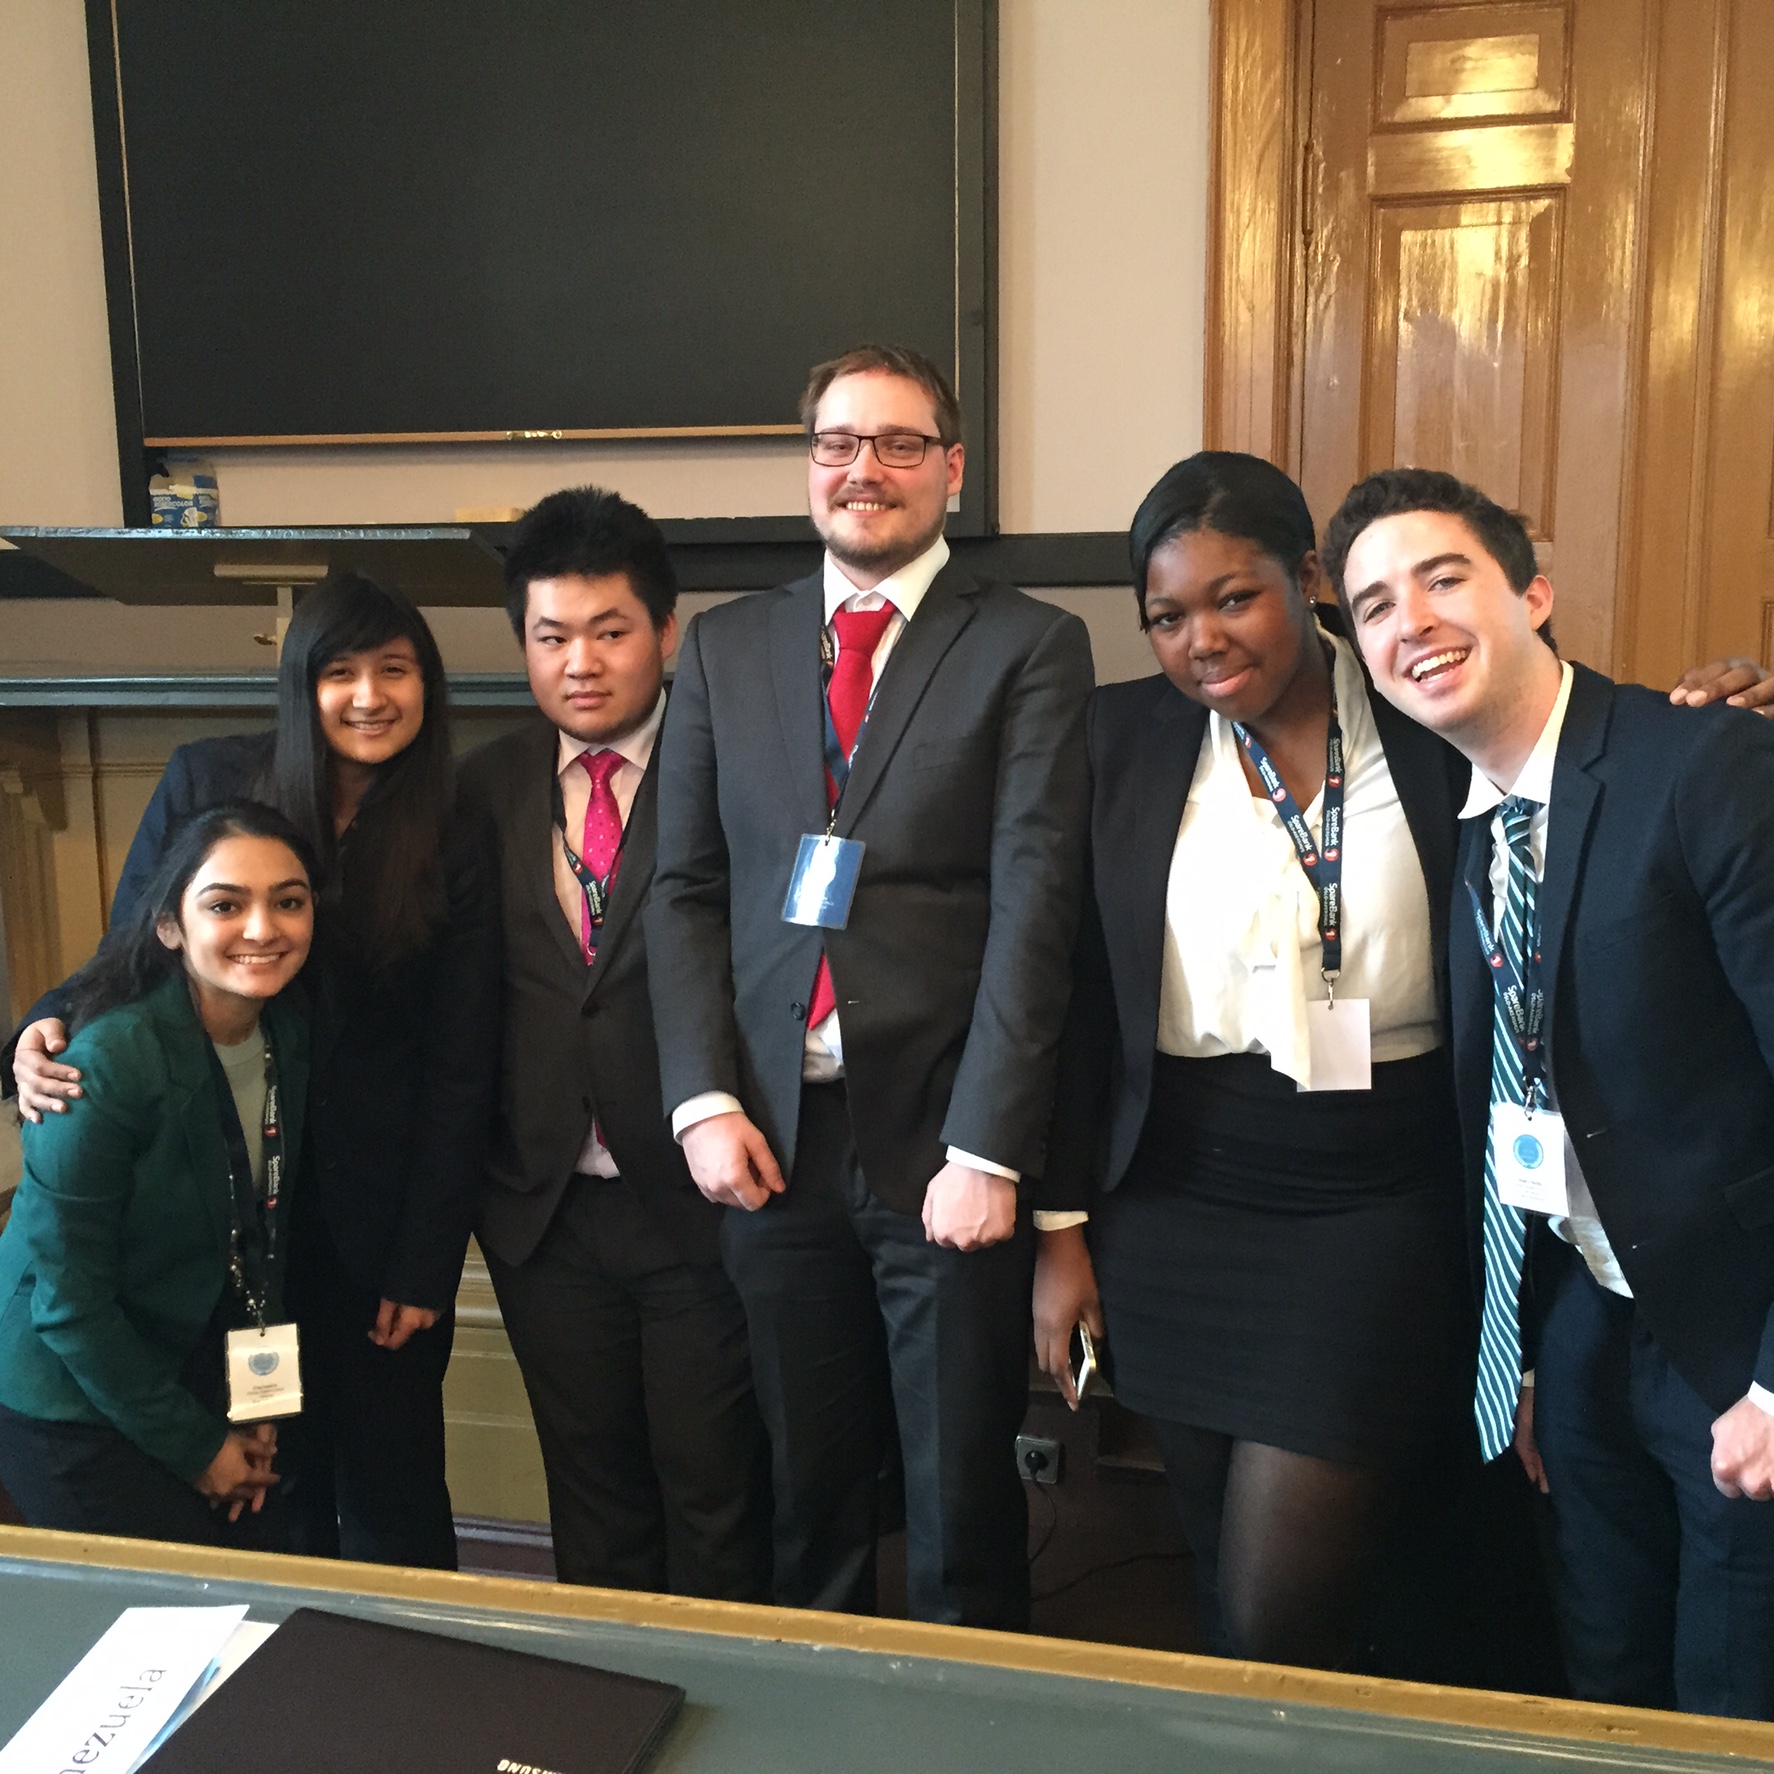 Pace New York City Model UN students (Priya Sakaria '17 and Jennifer Diaz '16 on the left and Shade Quailey '15 and Niall O'Reilly '16 on the right) who participated in the simulation of the United Nations Human Rights Council with their committee chairs (in the center)..